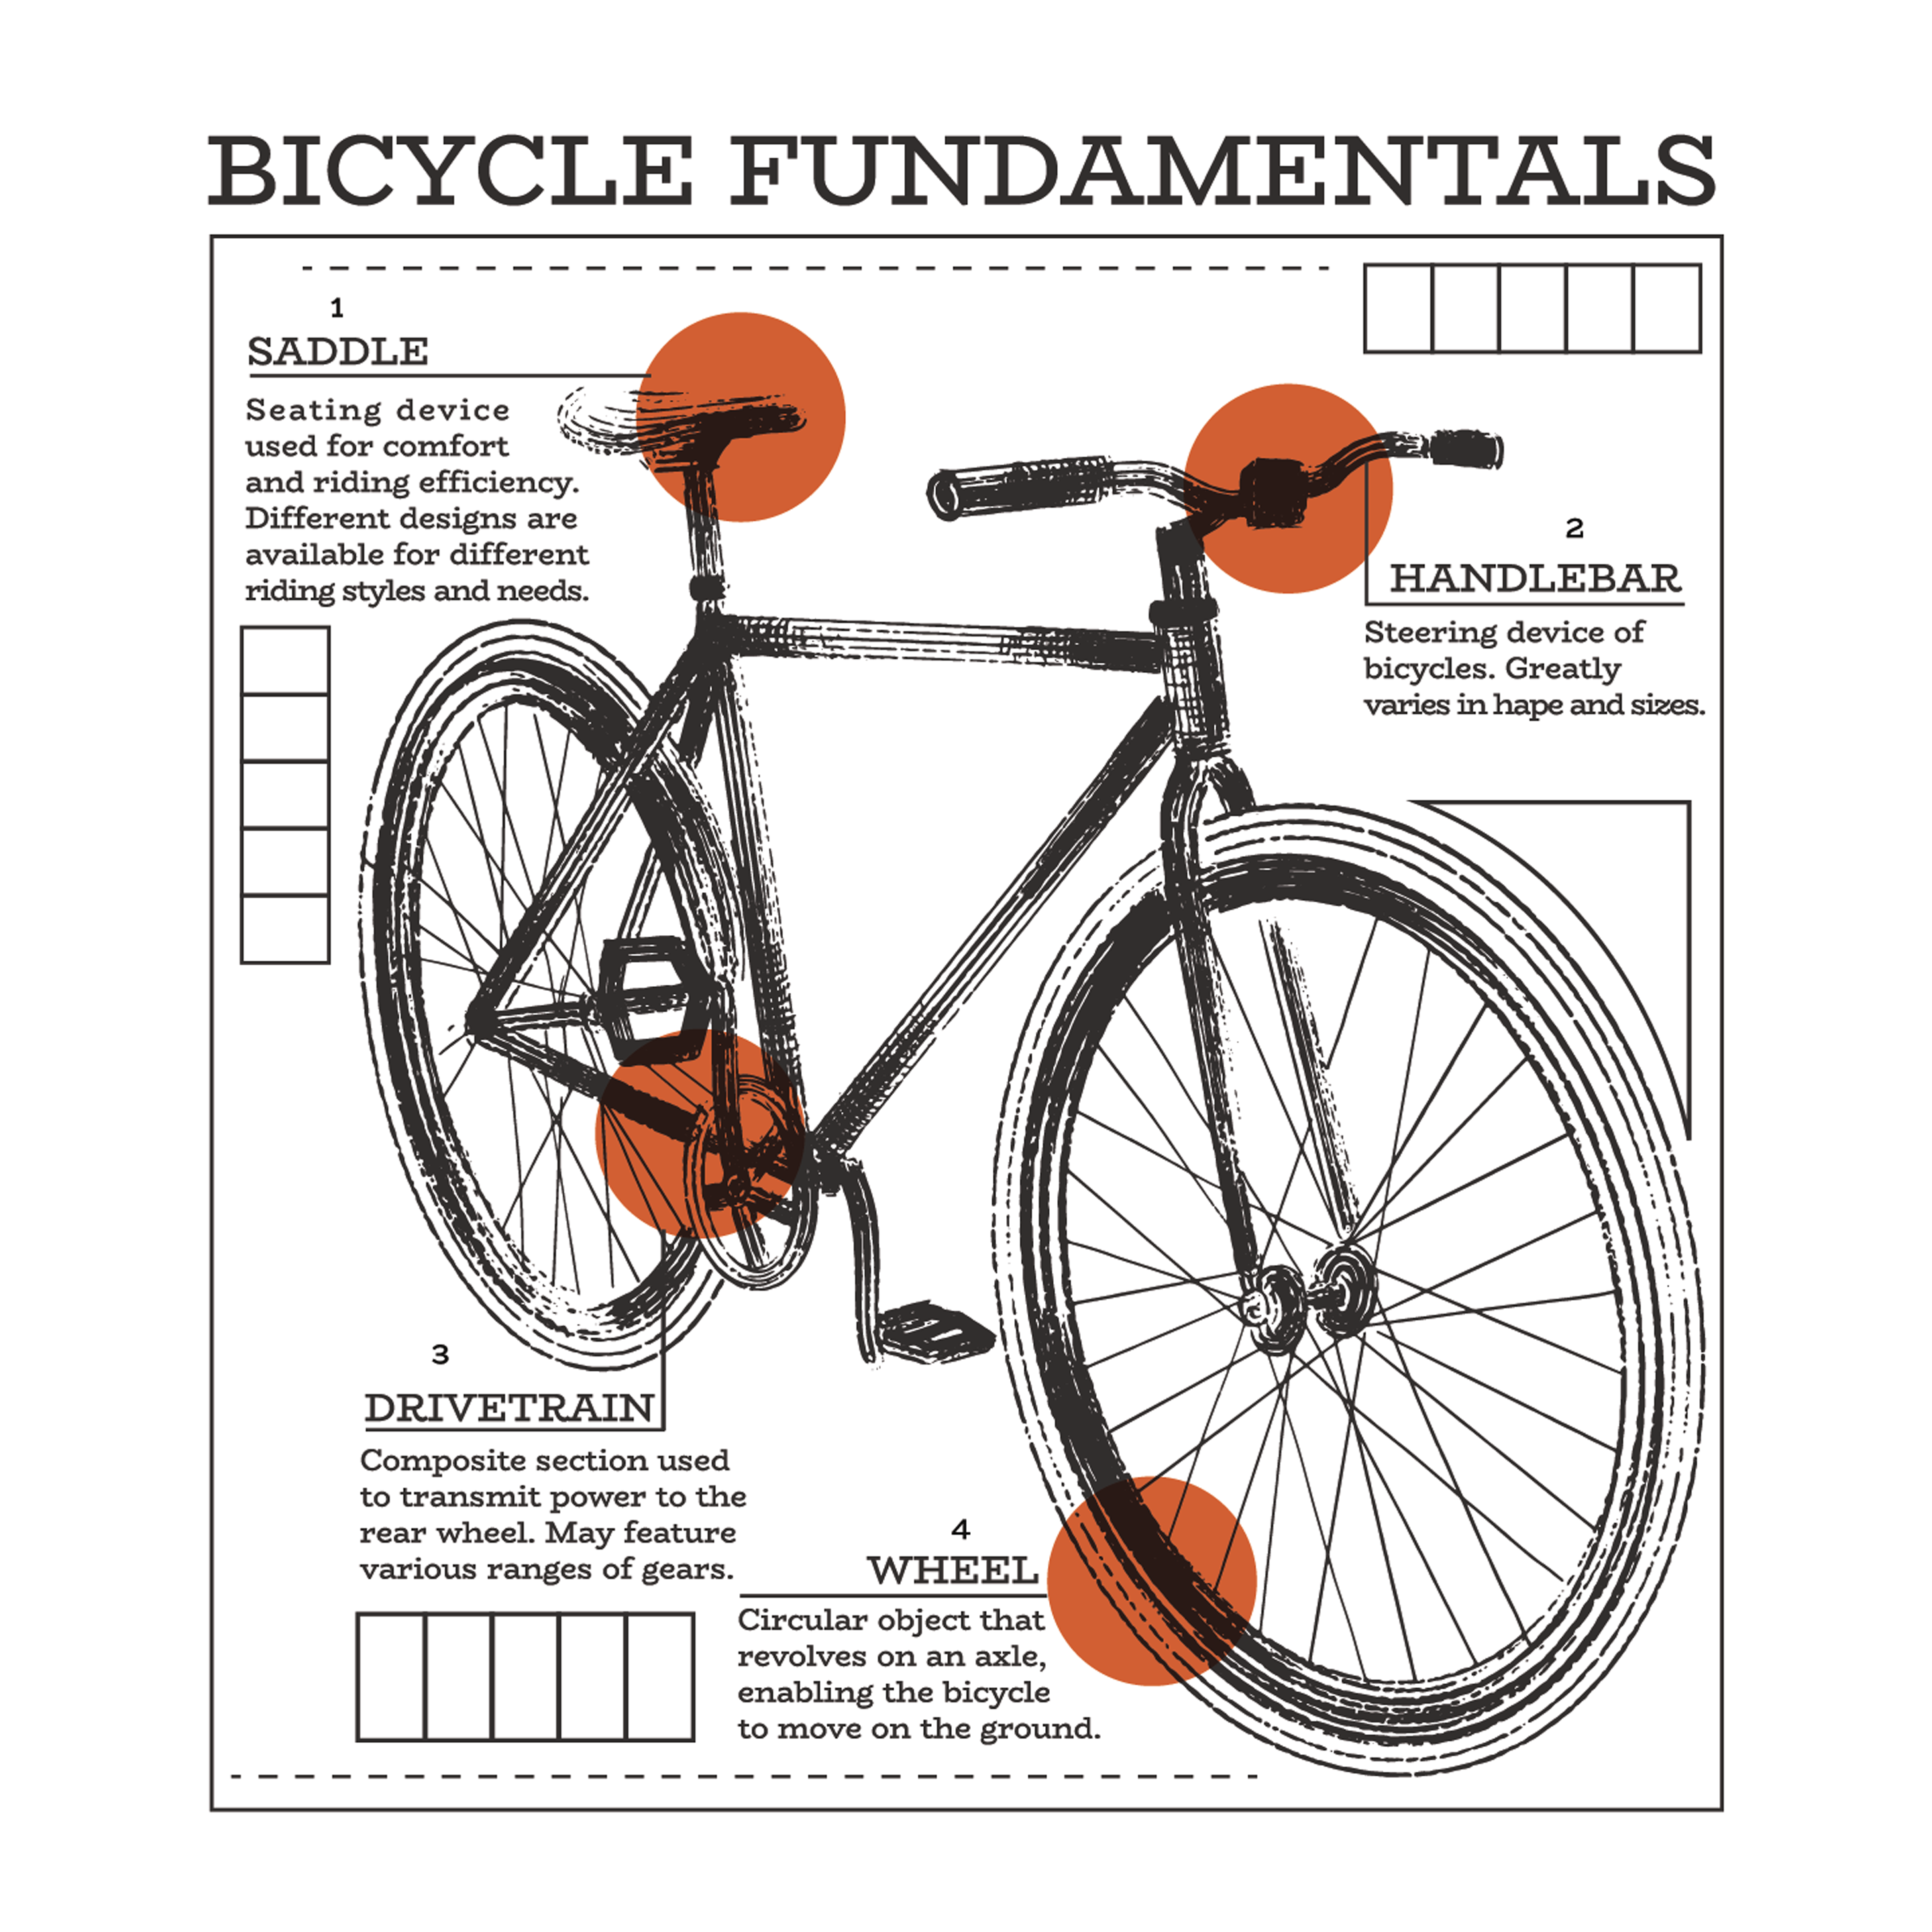 bicycle-fundamentals-infographic-design-theme